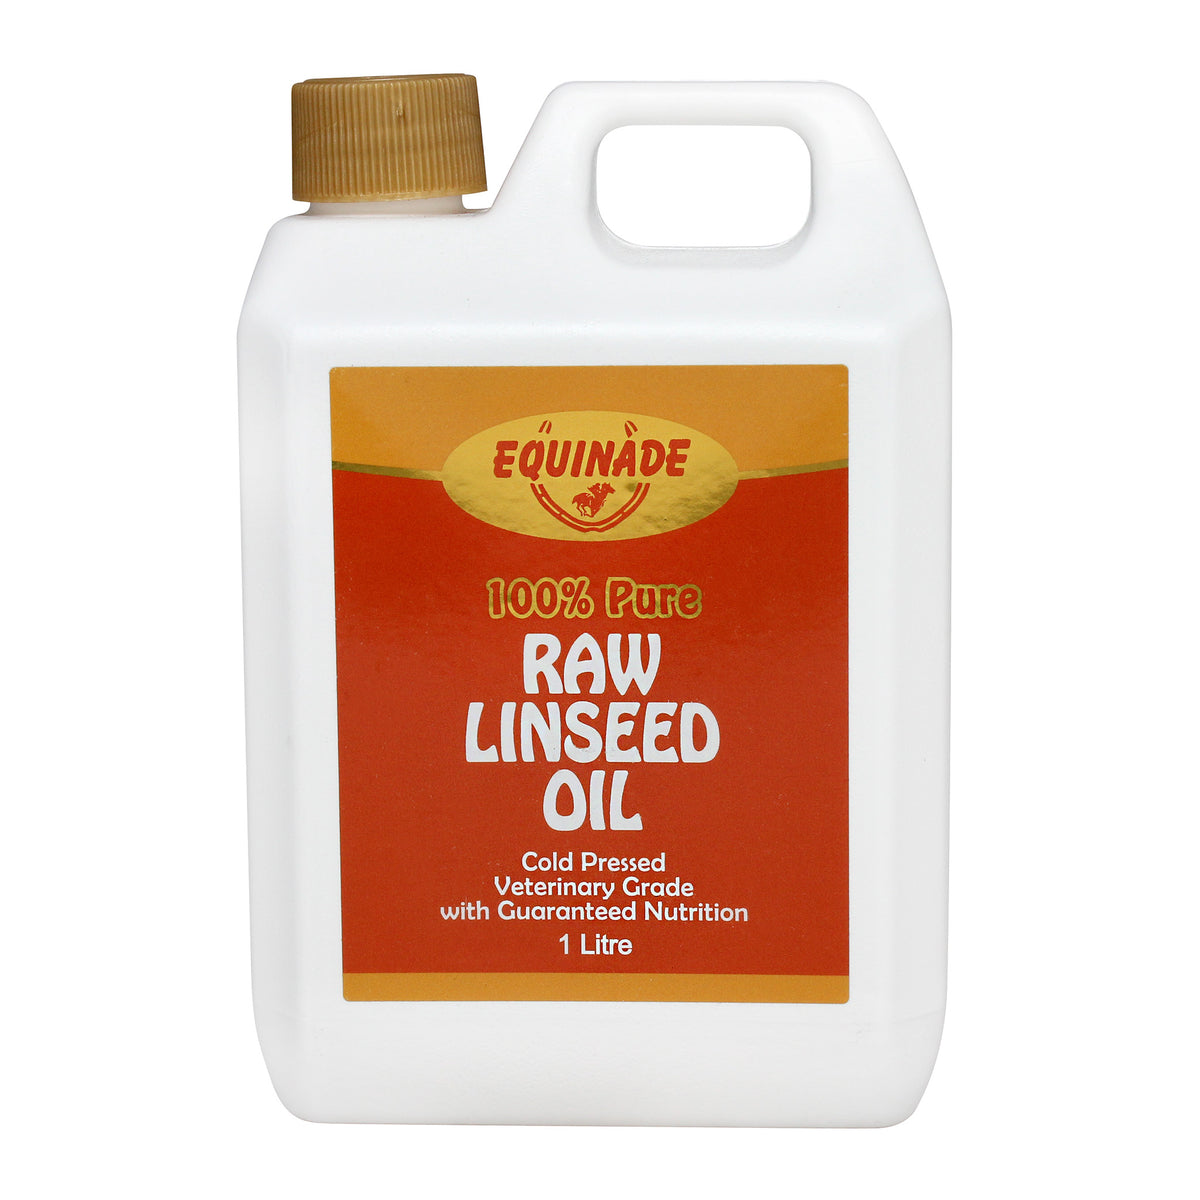 Equinade Pure Raw Linseed Oil